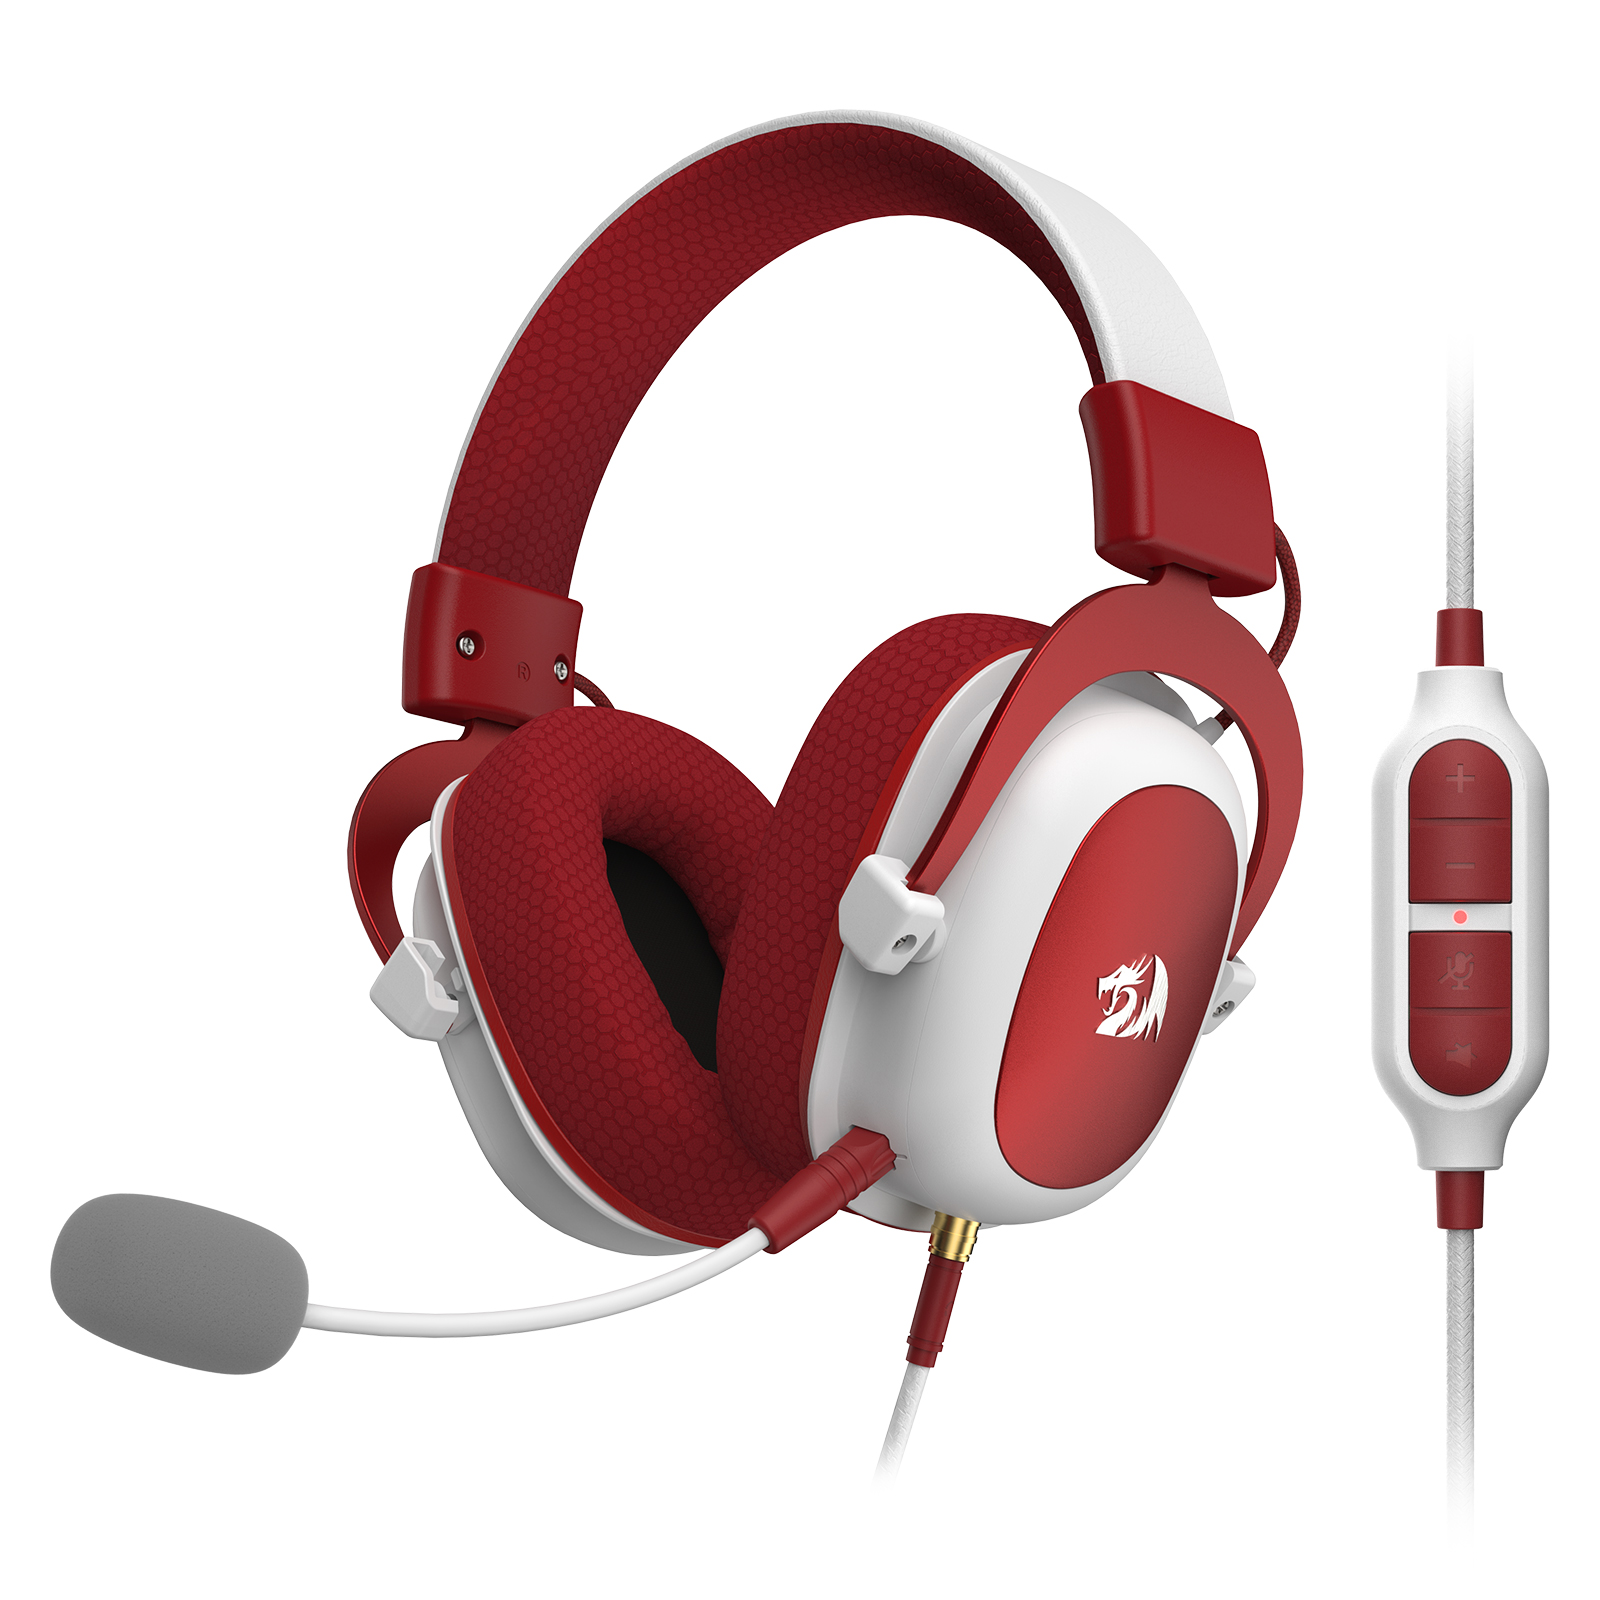 Redragon H510 Wired Gaming Headset - 7.1 Surround Sound - Memory Foam Ear Pads, Christmas Gift